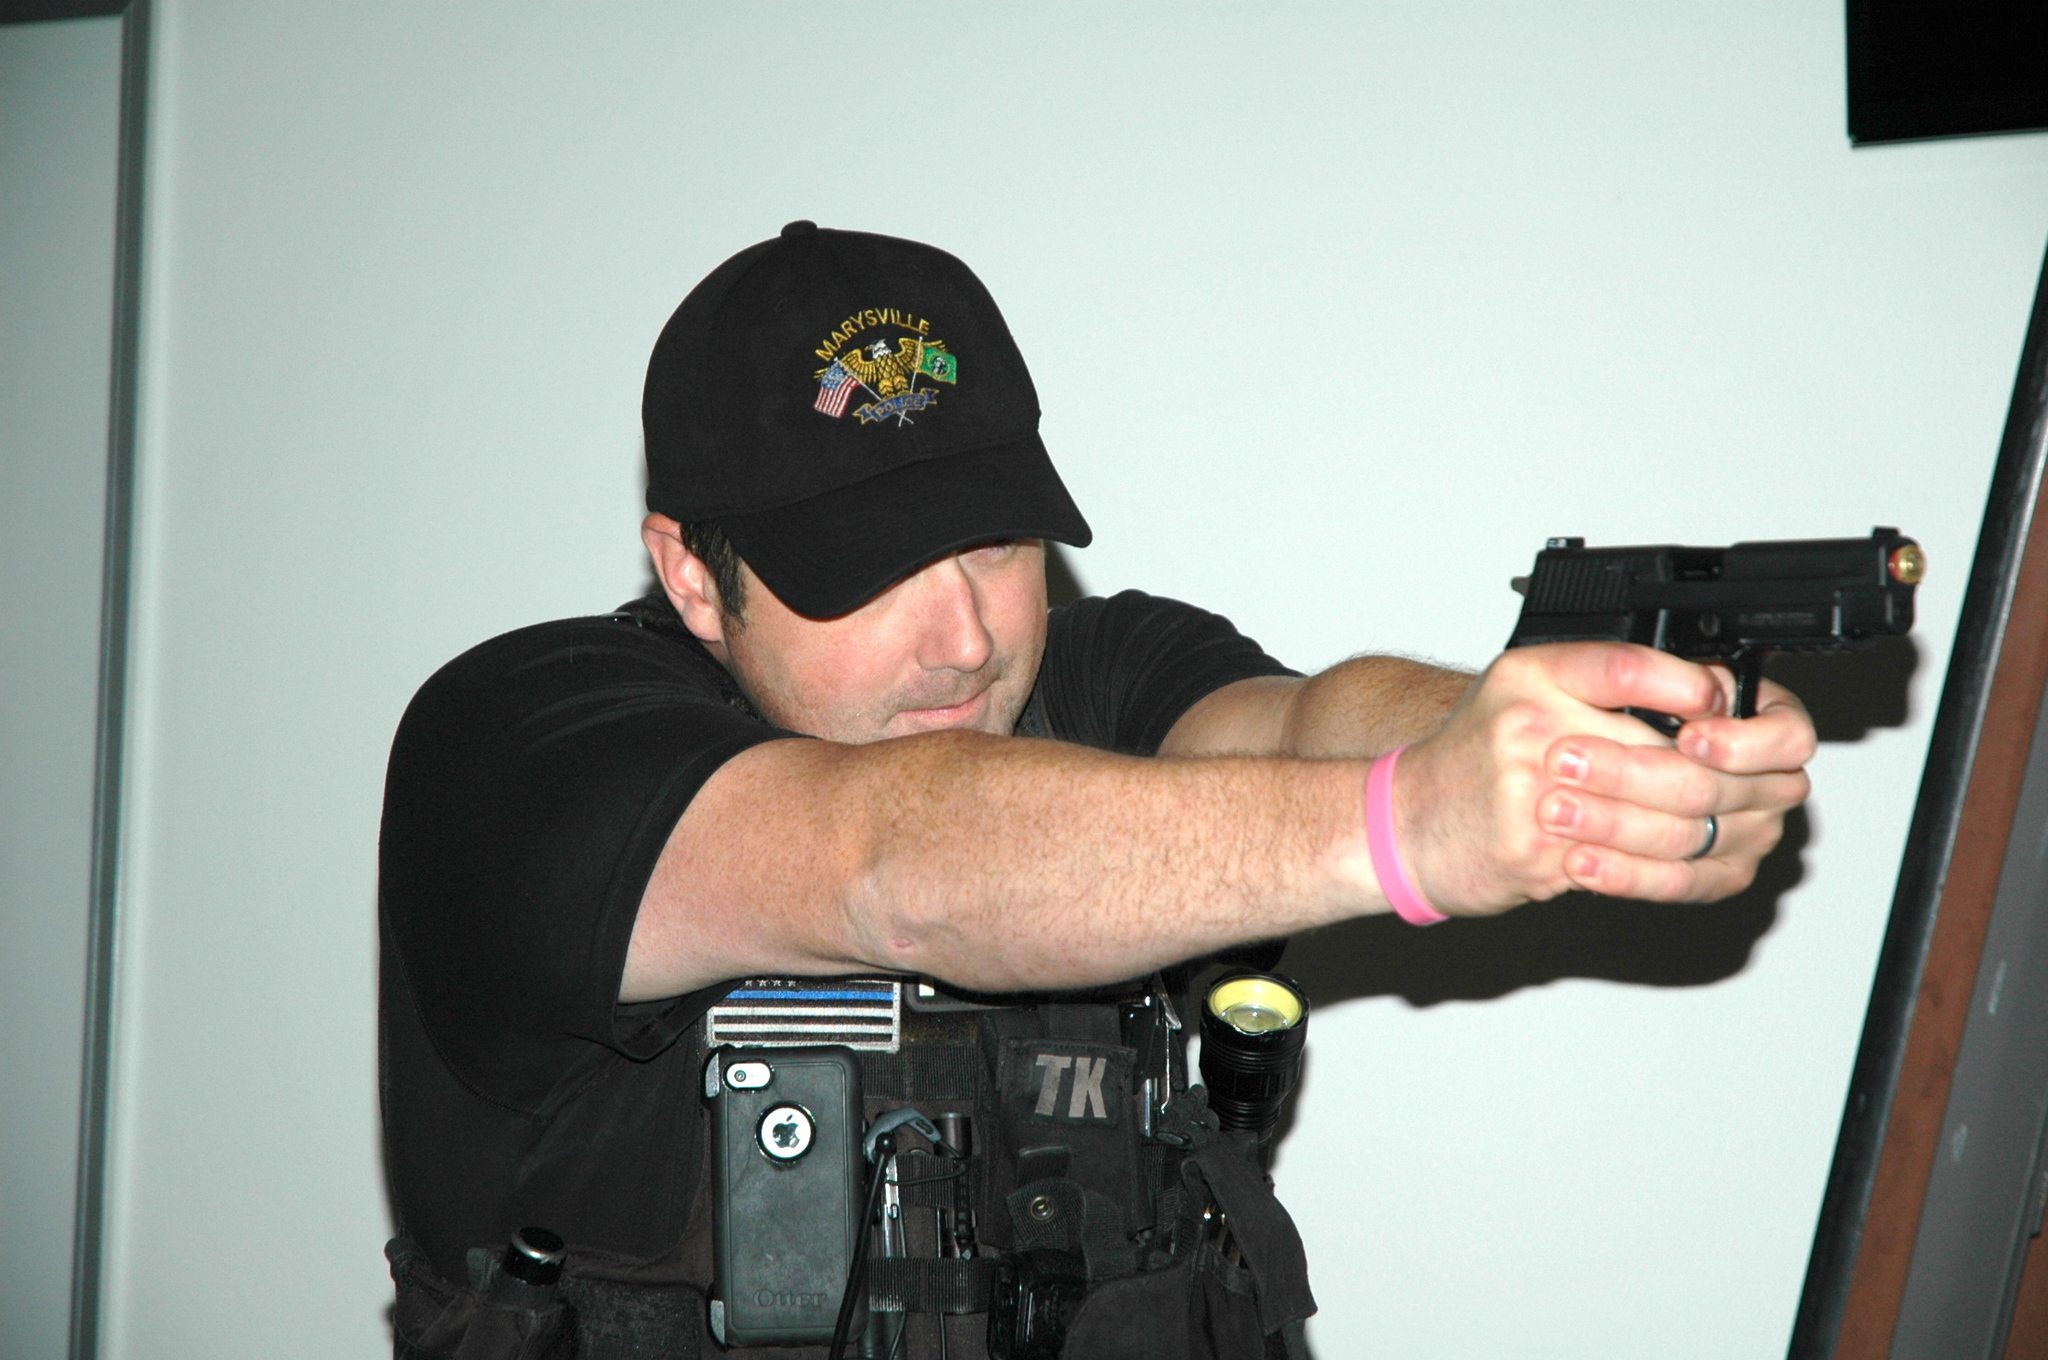 Kirk Boxleitner/Staff PhotoOfficer Mike Young seeks cover and draws his firearm during a simulated shooting at the Marysville Police Department May 11.